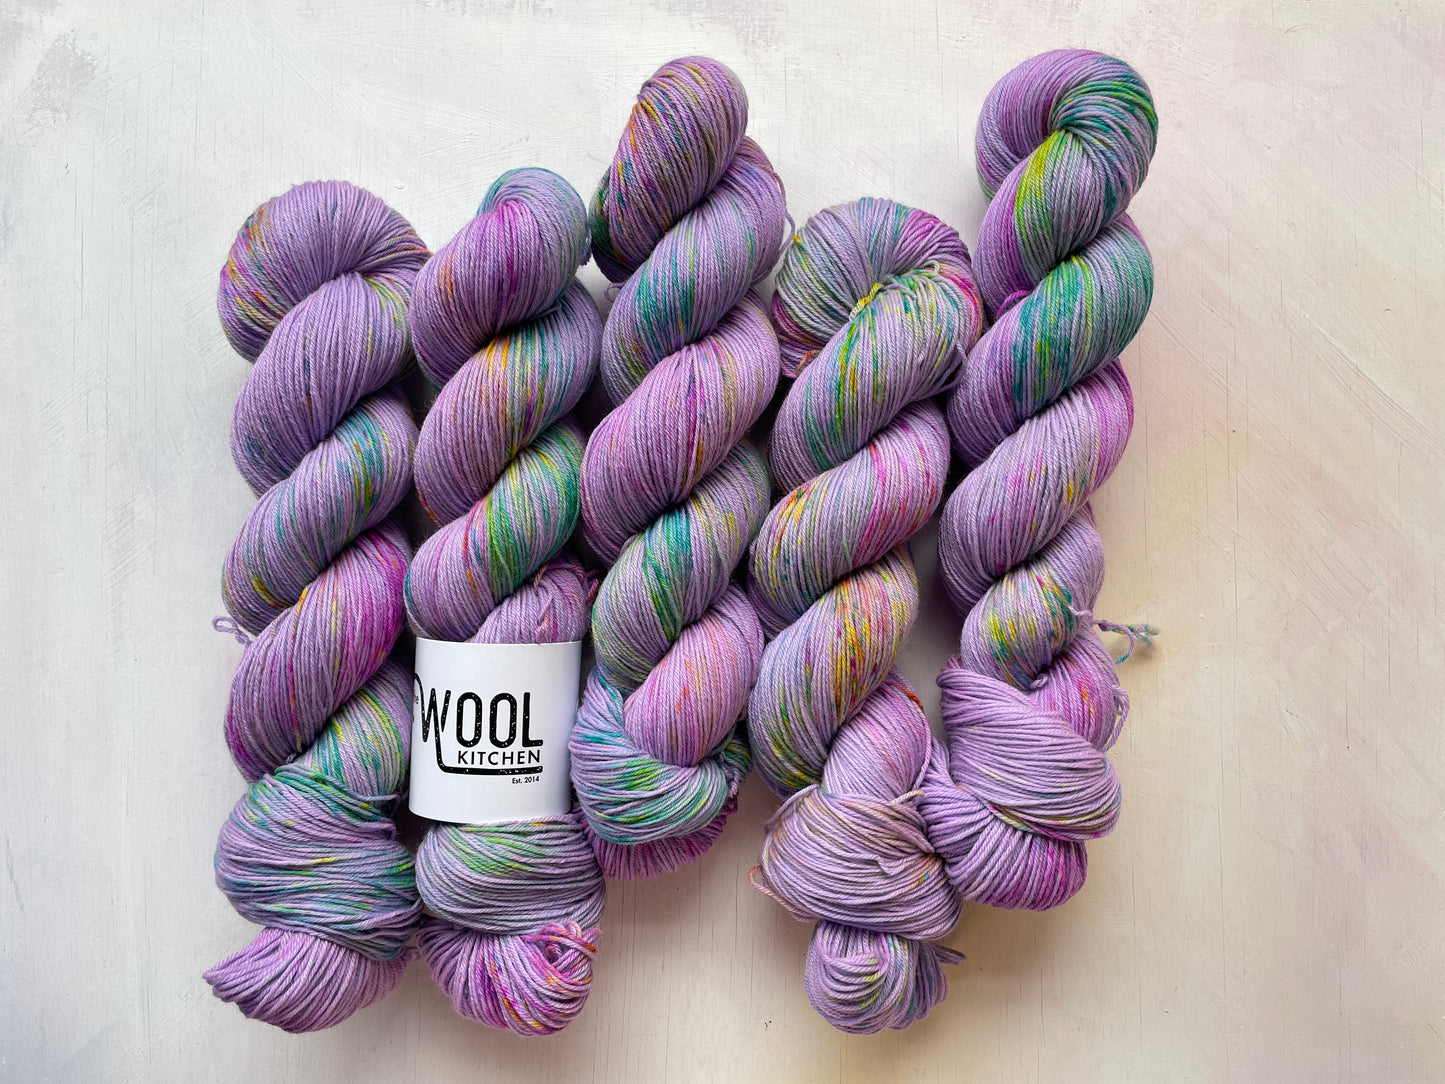 Iris from the 4ply Sock Yarn Collection by the hand dyed yarn expert, The Wool Kitchen